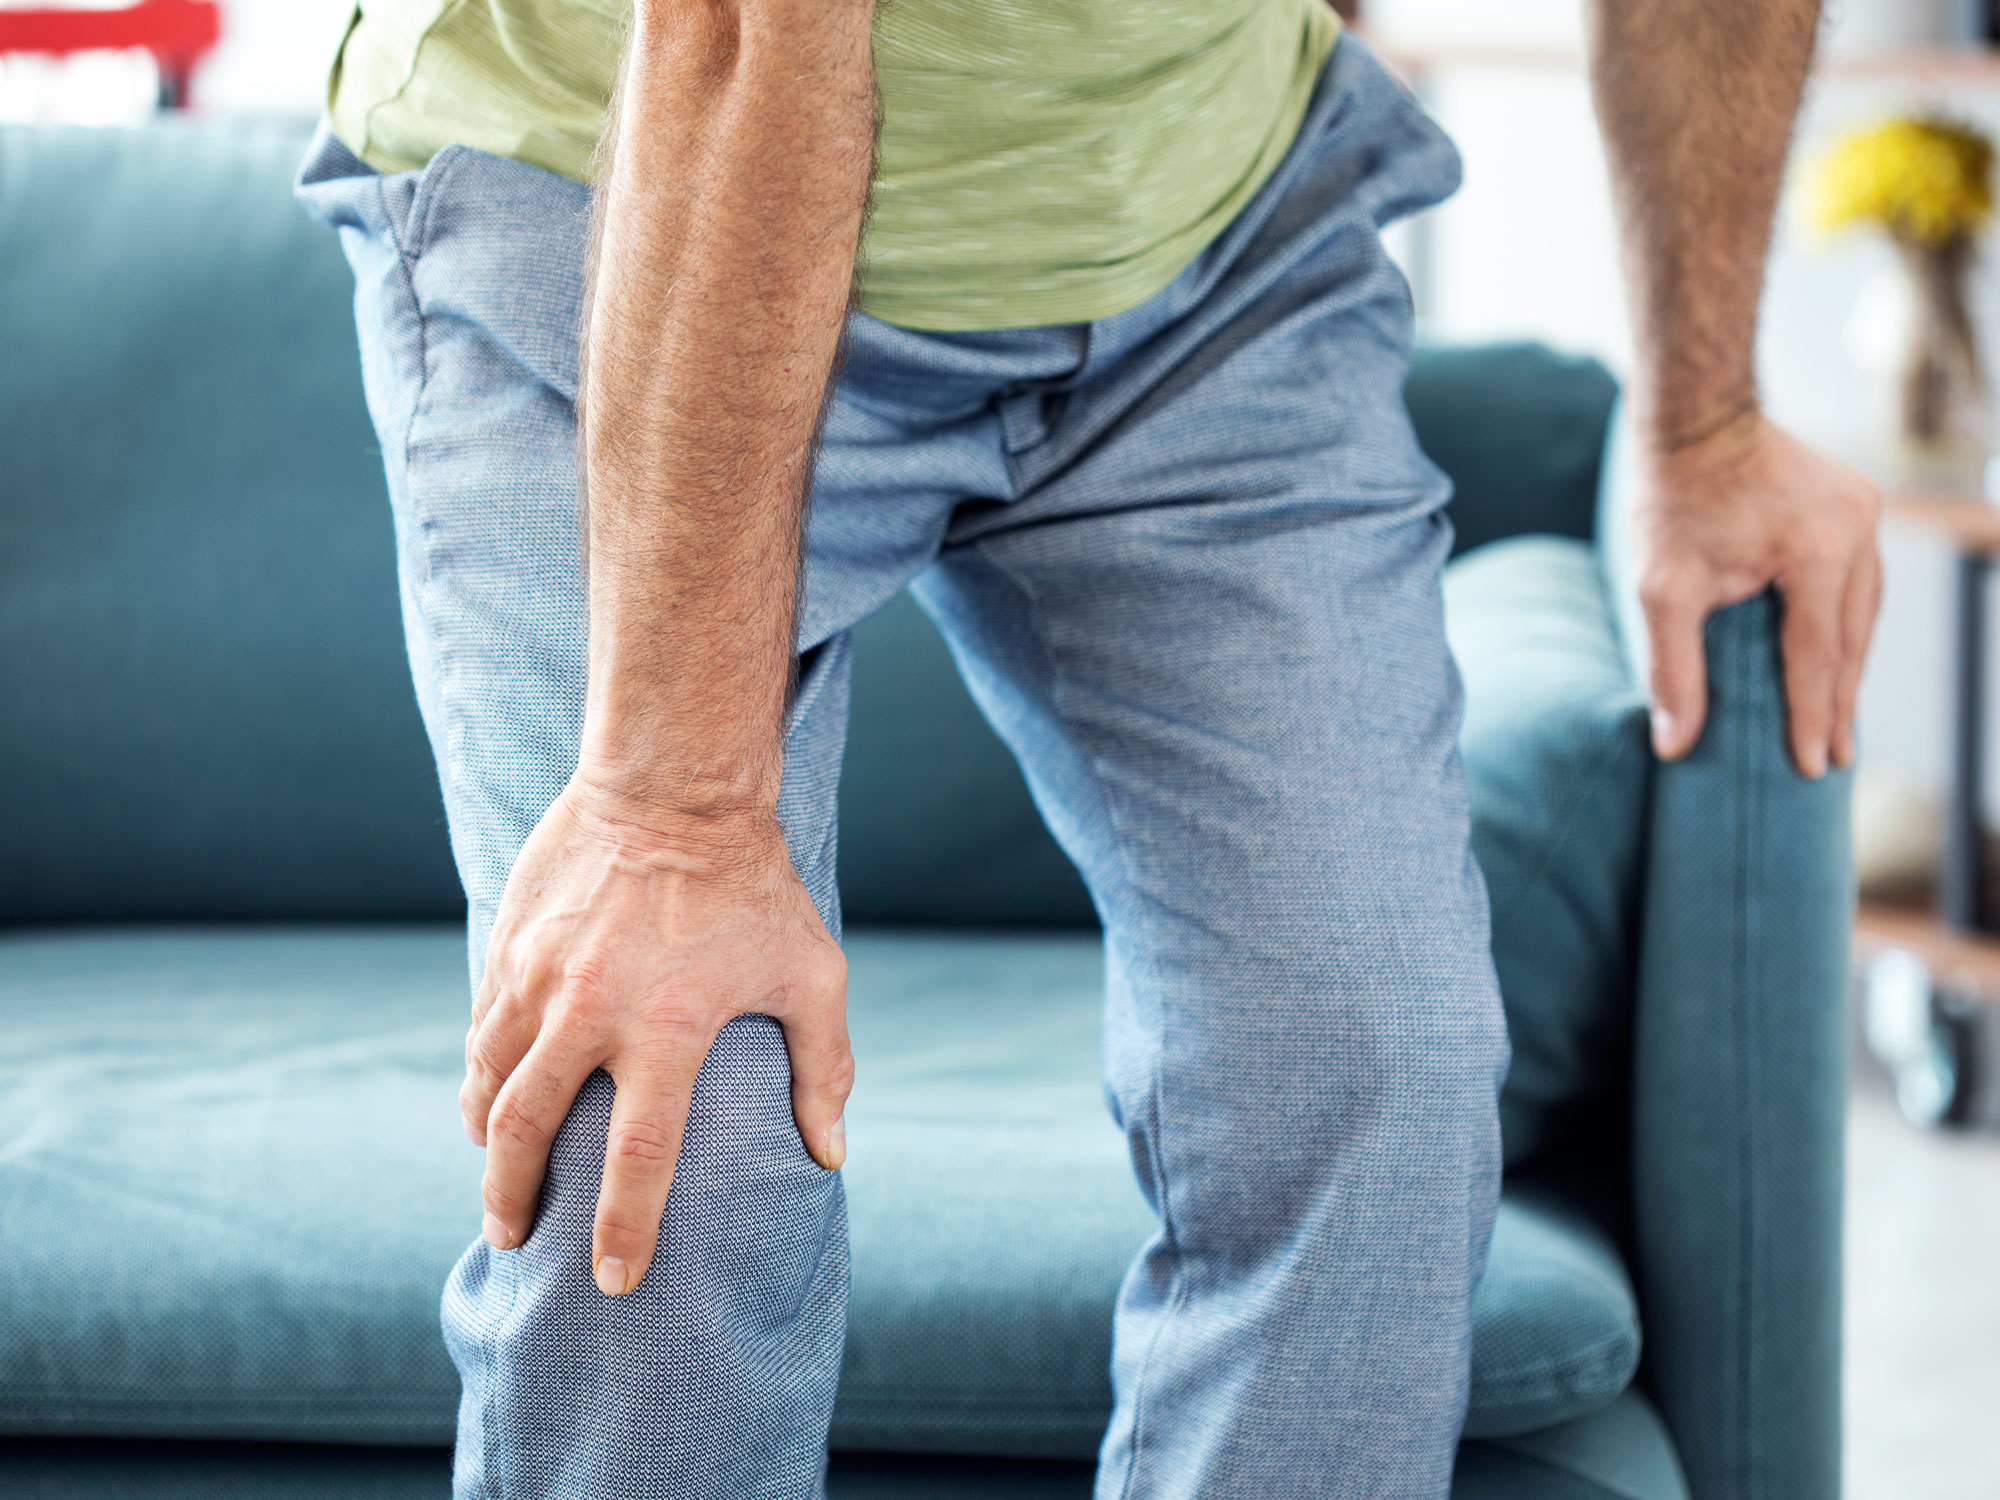 Arthritis: Proof that if you don’t use it, you lose it